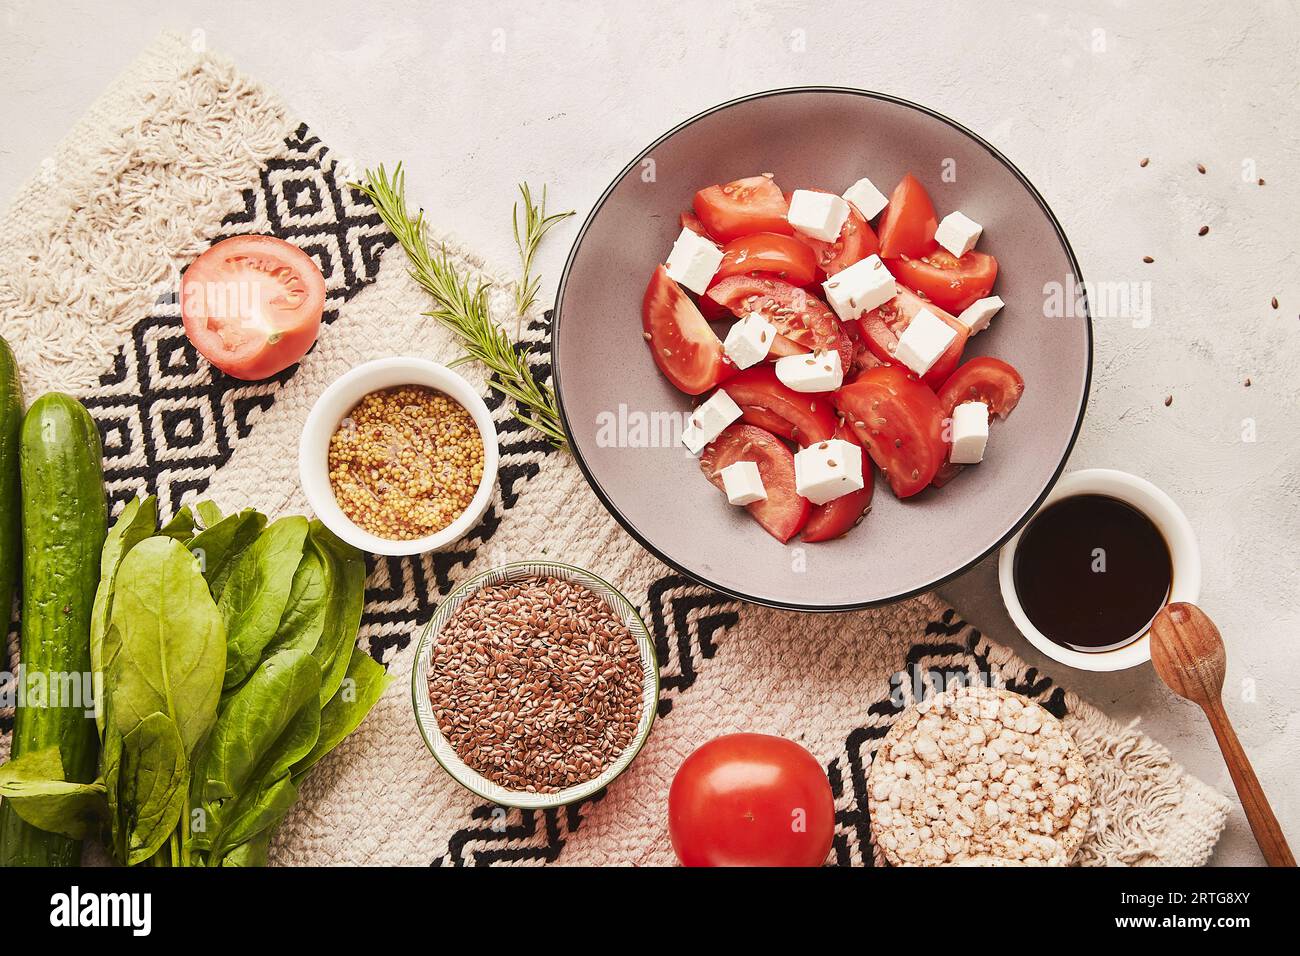 Vegan fresh ingredients for healthy low fodmap, Mediterranean diet with vegetables, fruits, greens, salad with feta. Flat lay, copy space. Stock Photo